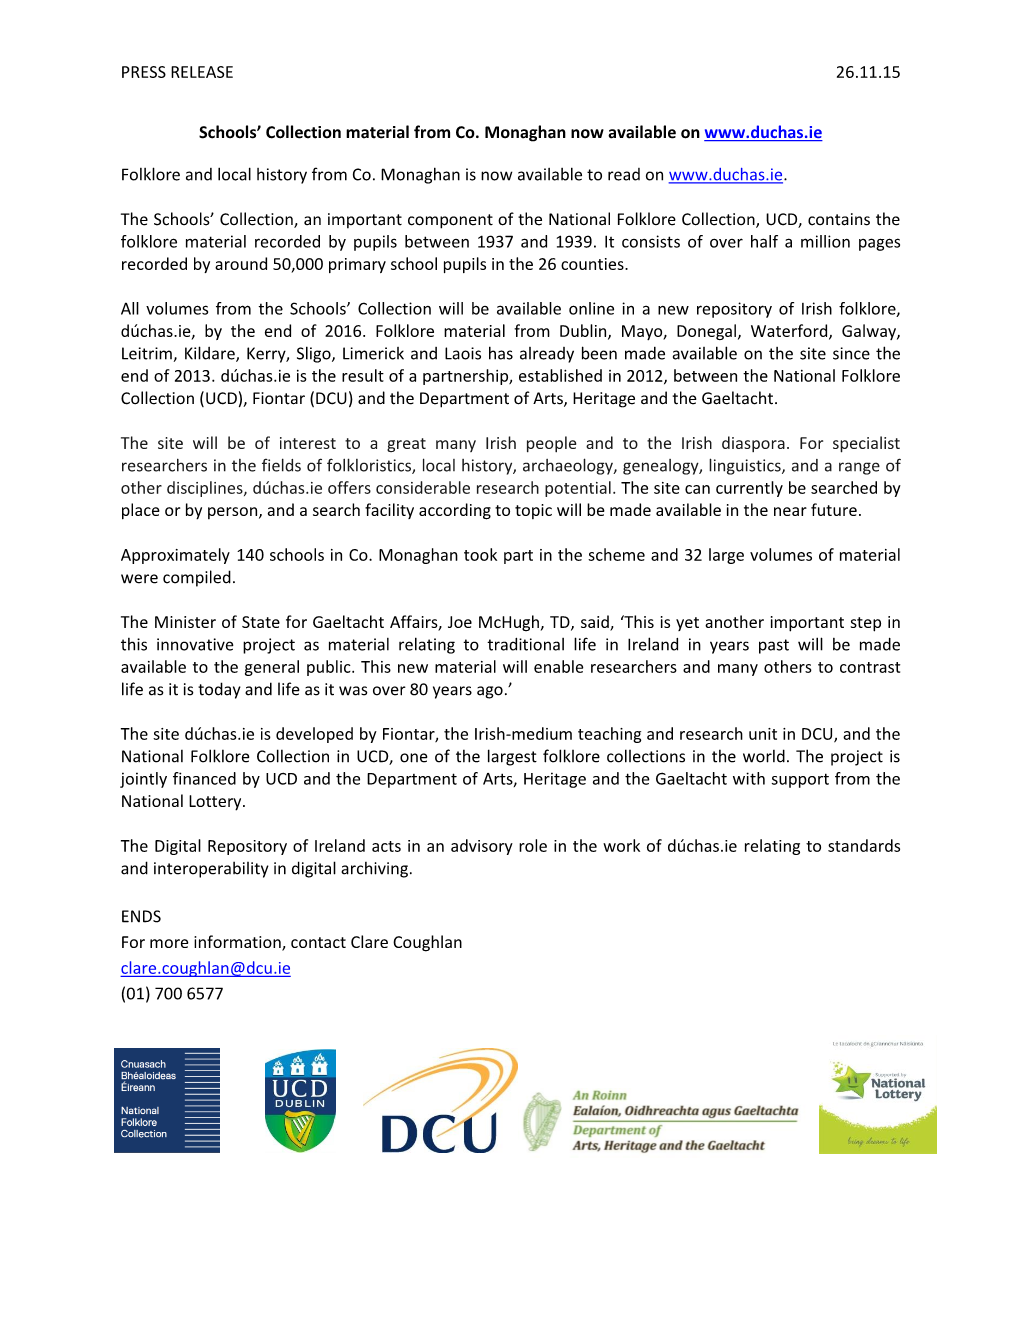 Information, Contact Clare Coughlan Clare.Coughlan@Dcu.Ie (01) 700 6577 PRESS RELEASE 26.11.15